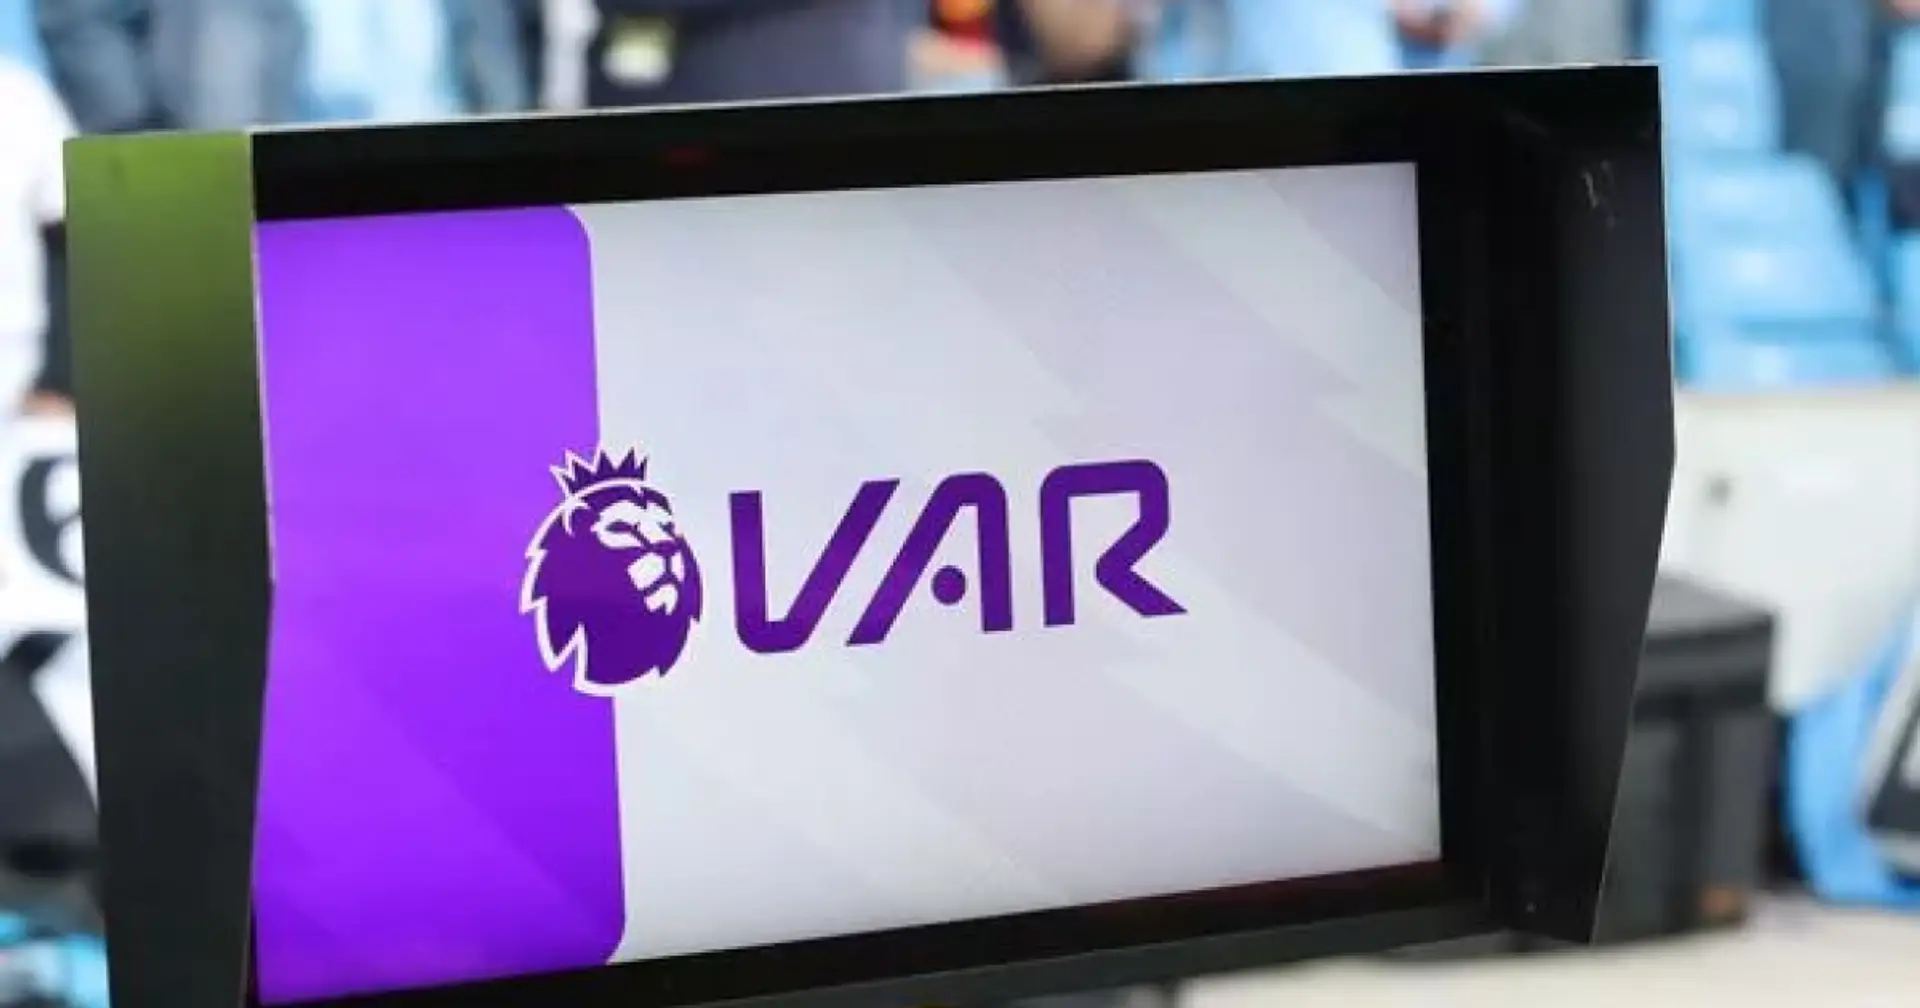 'People who wanted it realize it’s been a disaster': Football fans compare VAR to Brexit